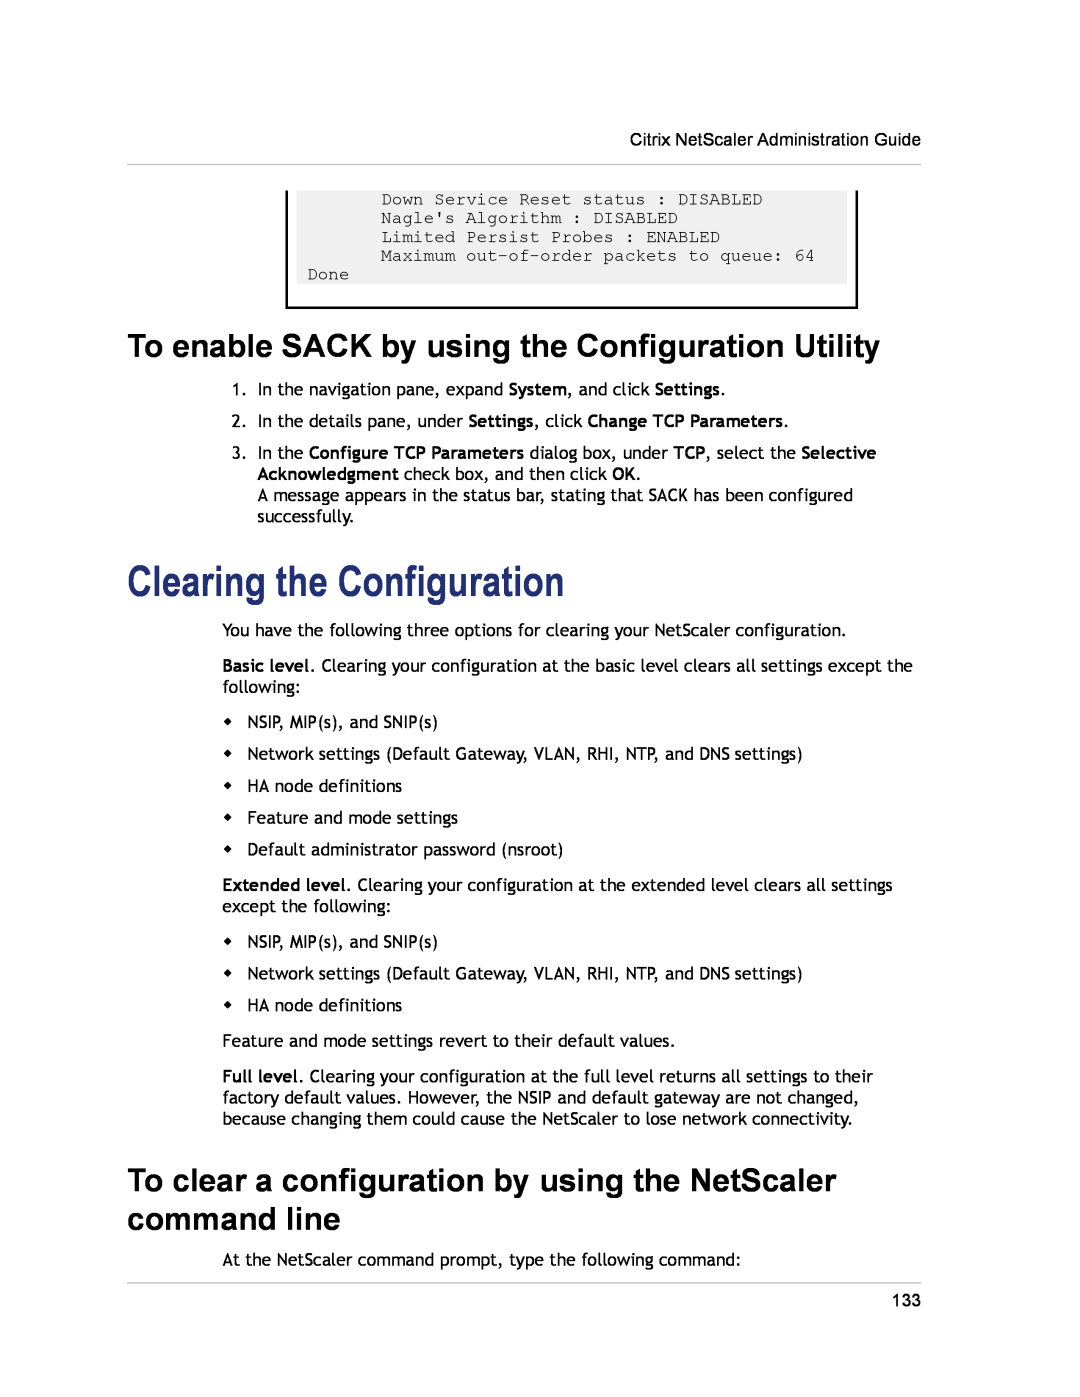 Citrix Systems CITRIX NETSCALER 9.3 manual Clearing the Configuration, To enable SACK by using the Configuration Utility 